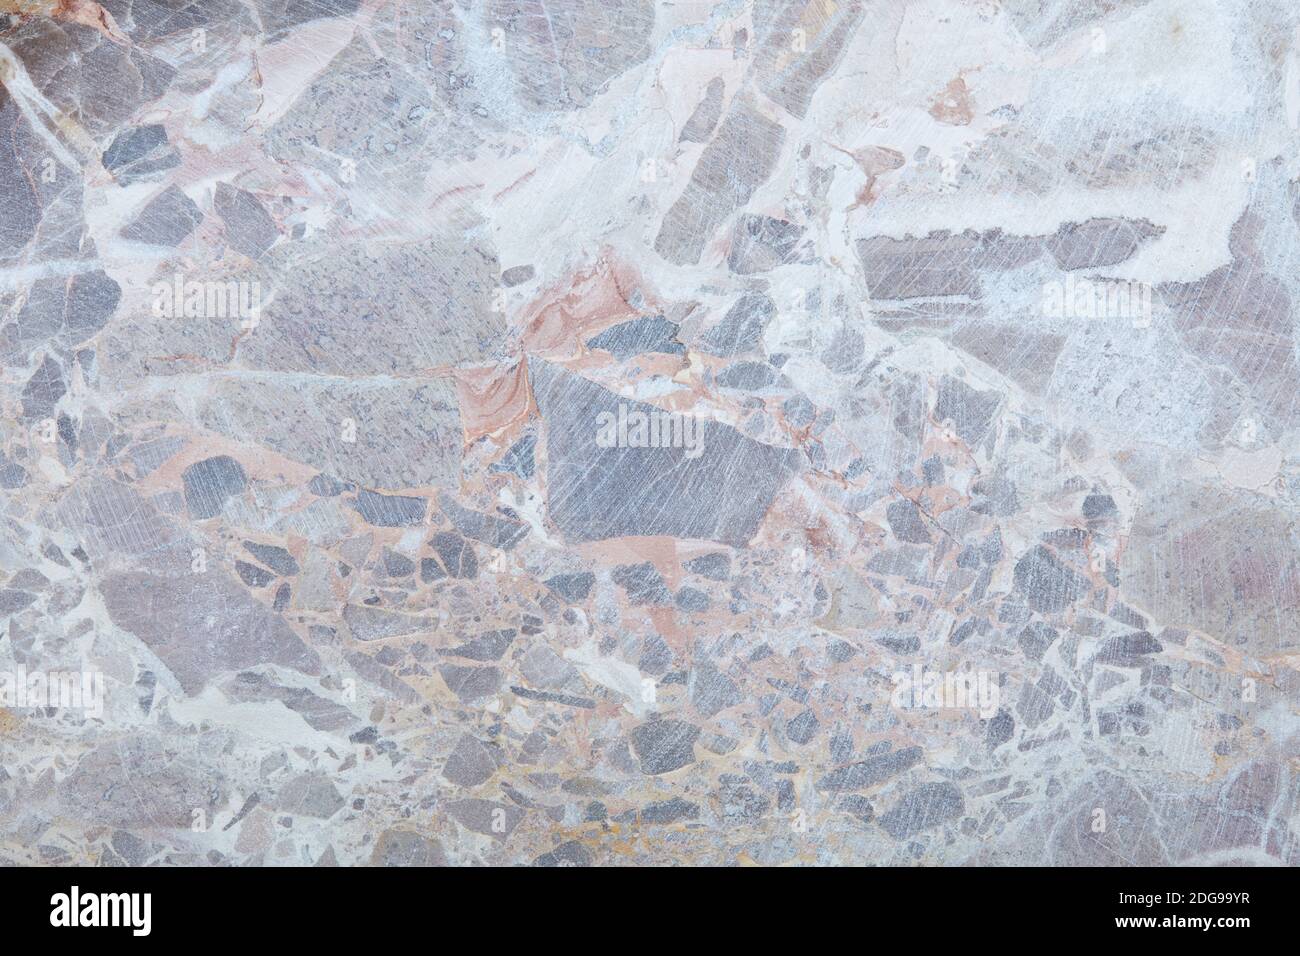 Variegated stone in gray, white and brown colors texture background Stock Photo